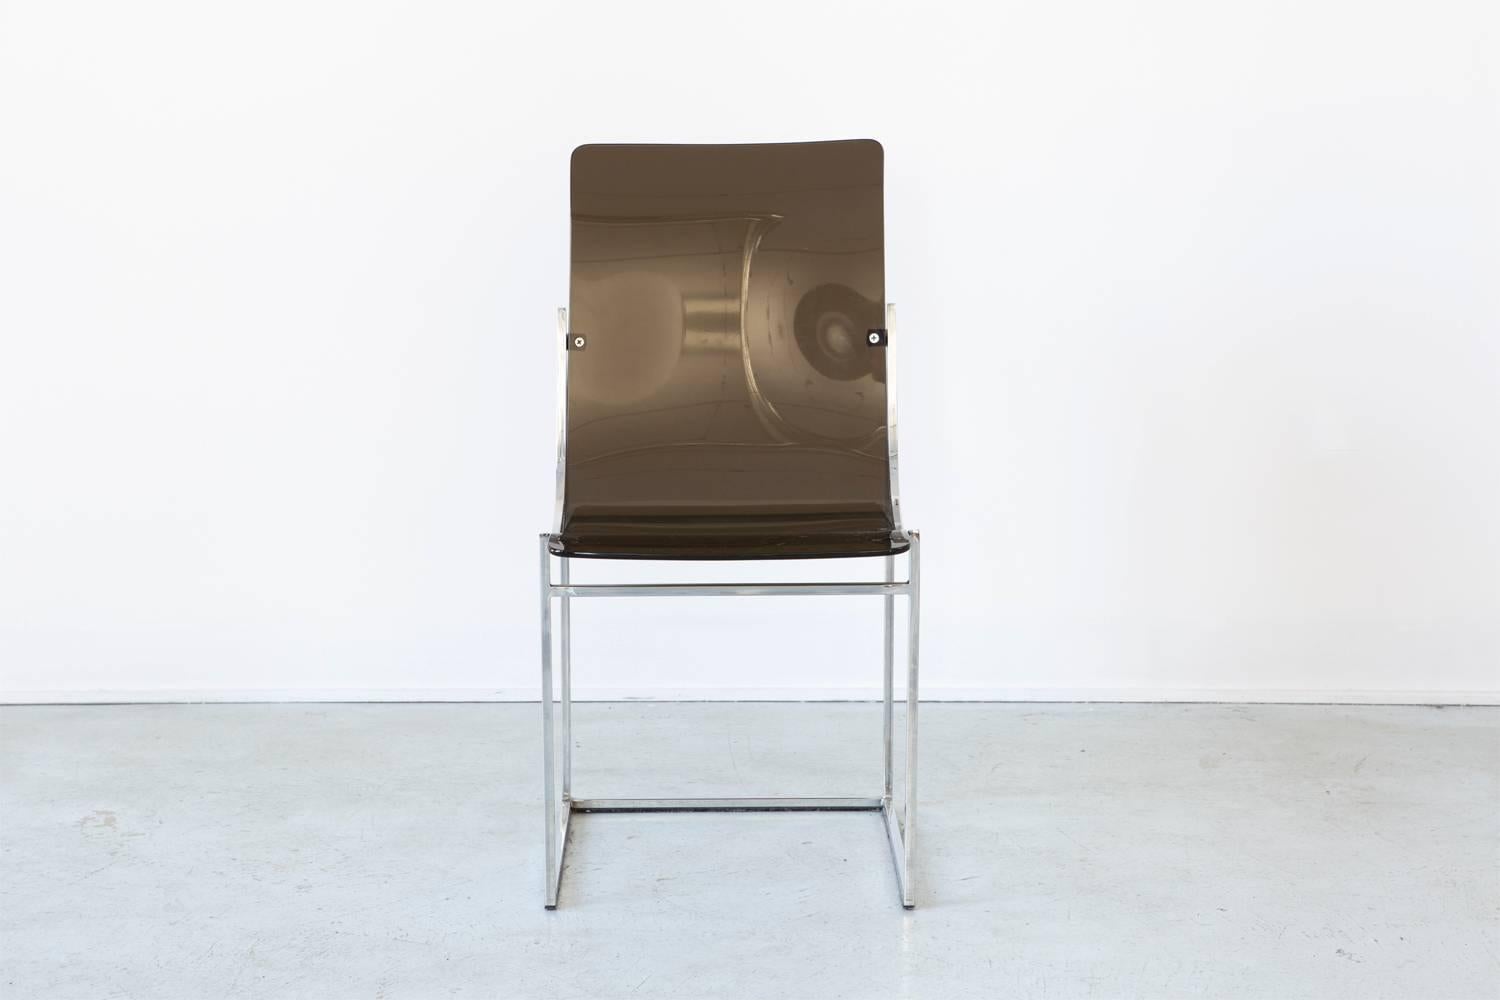 Occasional chair.

Black Lucite and chrome, circa 1960s.

Measures: 35" H x 17 ⅞" W x 26 ¾" D x seat 17 ⅞" H.